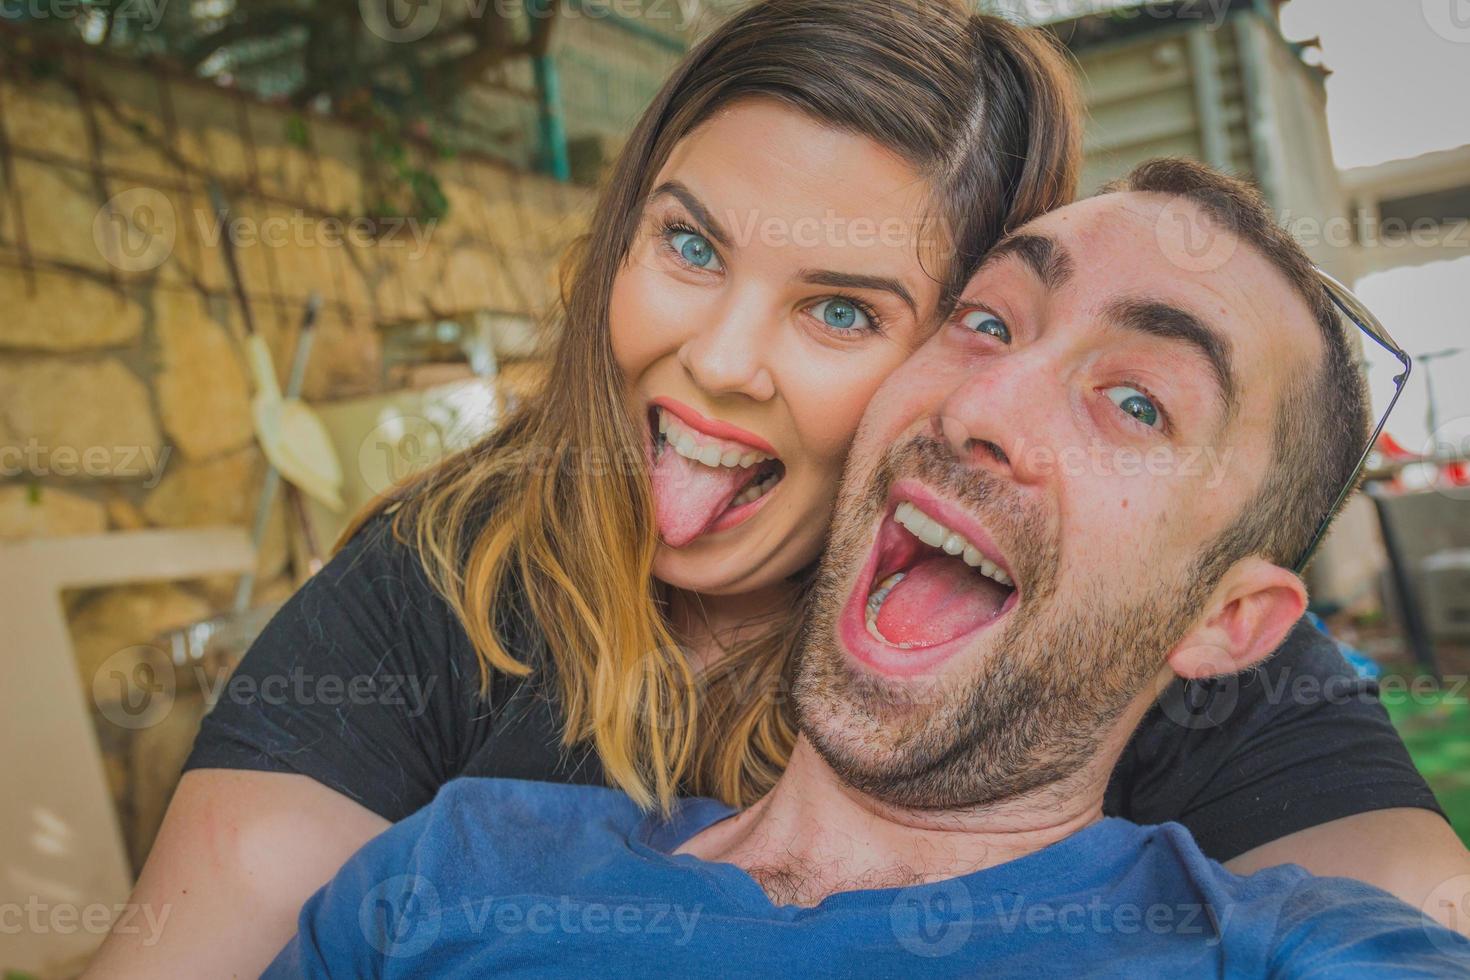 Young couple enjoying together in the backyard. They are smiling, laughing and making funny faces together photo